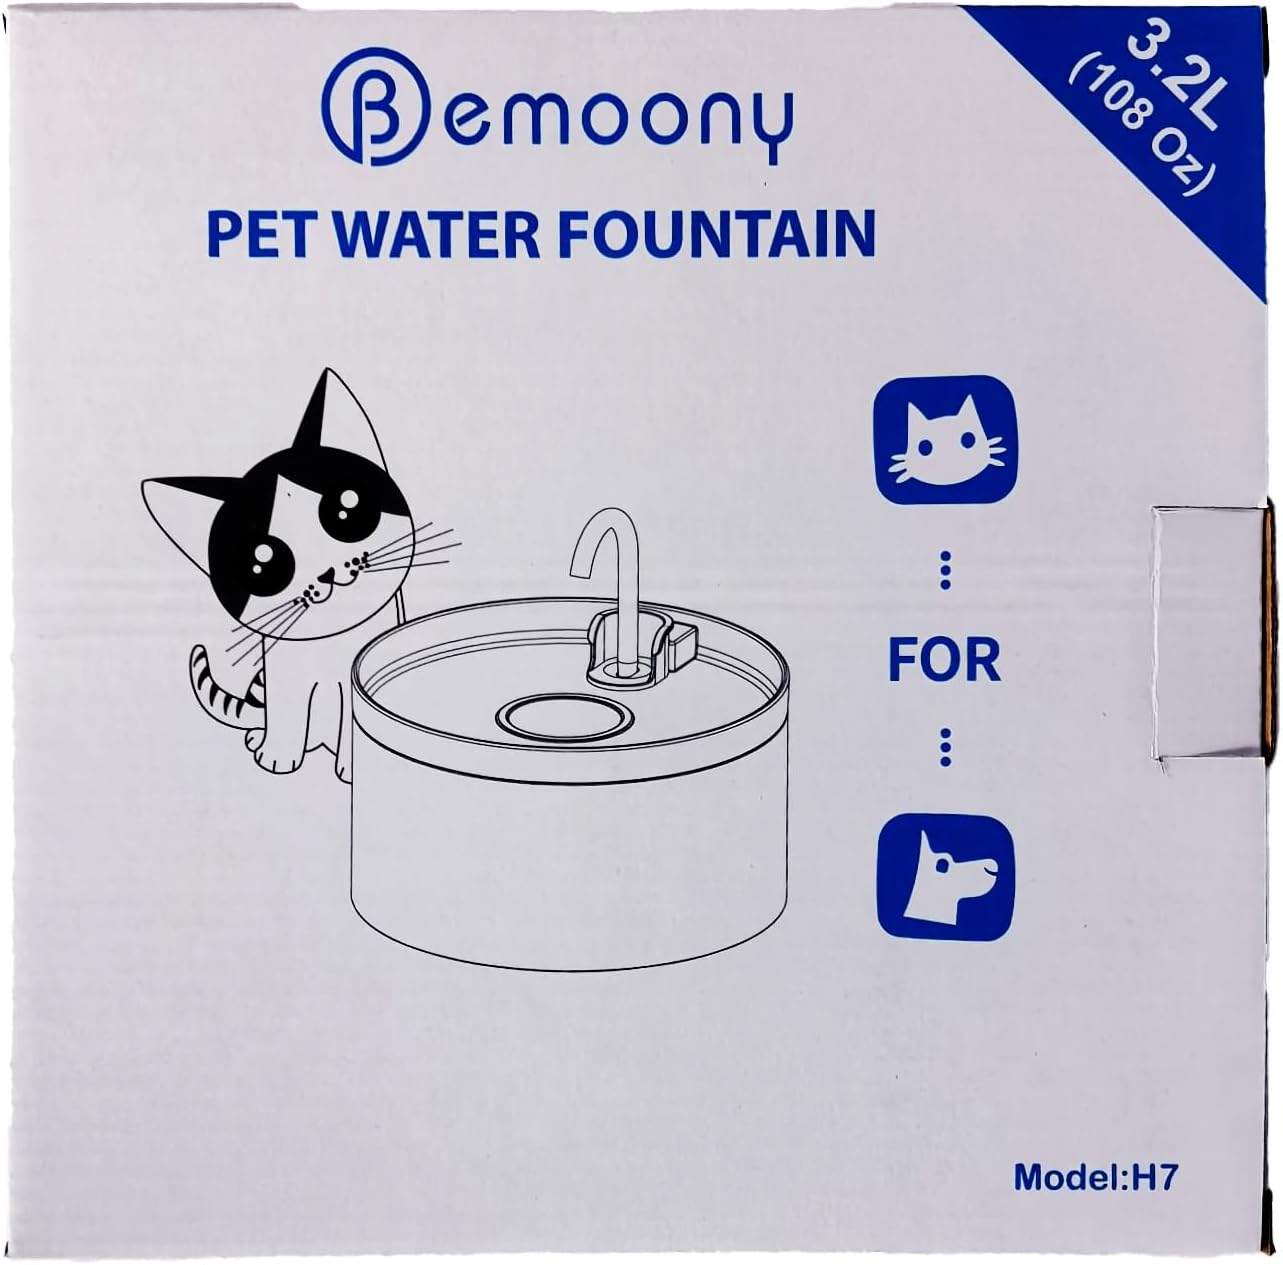 Cat Water Fountain:108oz/3.2L Cat Fountain Super Silent Pet Water Fountain - Water Fountains for Cats Indoor - Faucet Cat Fountain - Quiet Water Pump - Suitable for Cats and Dogs - BEMOONY